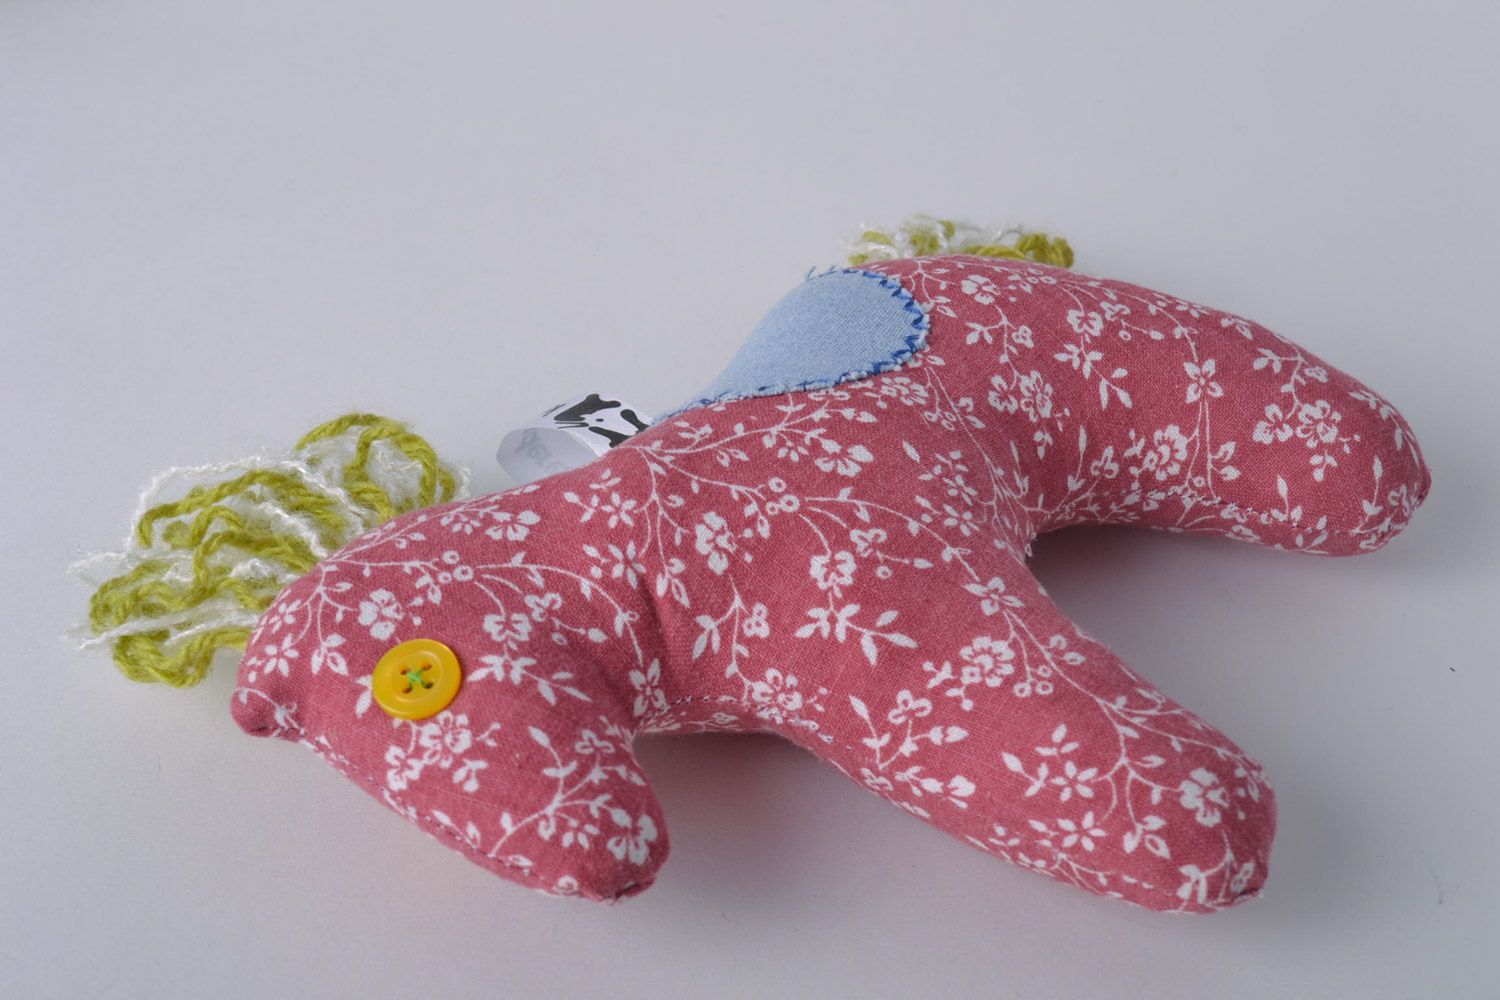 Handmade small soft toy sewn of bright pink patterned fabric horse for baby girl photo 3